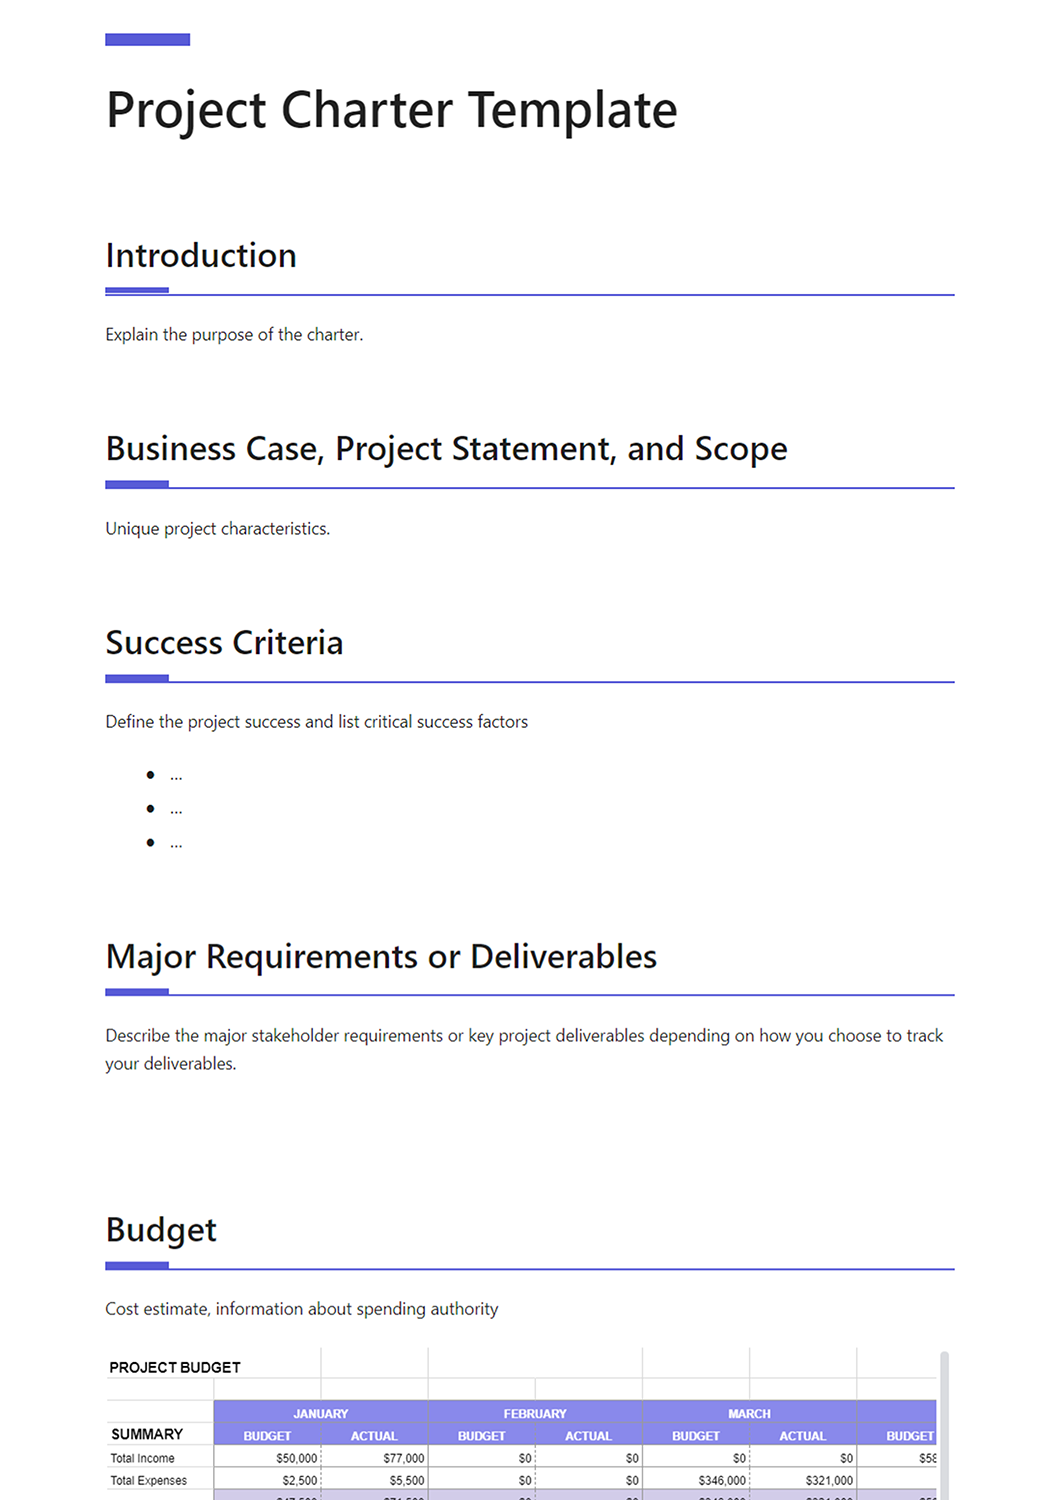 Project charter template